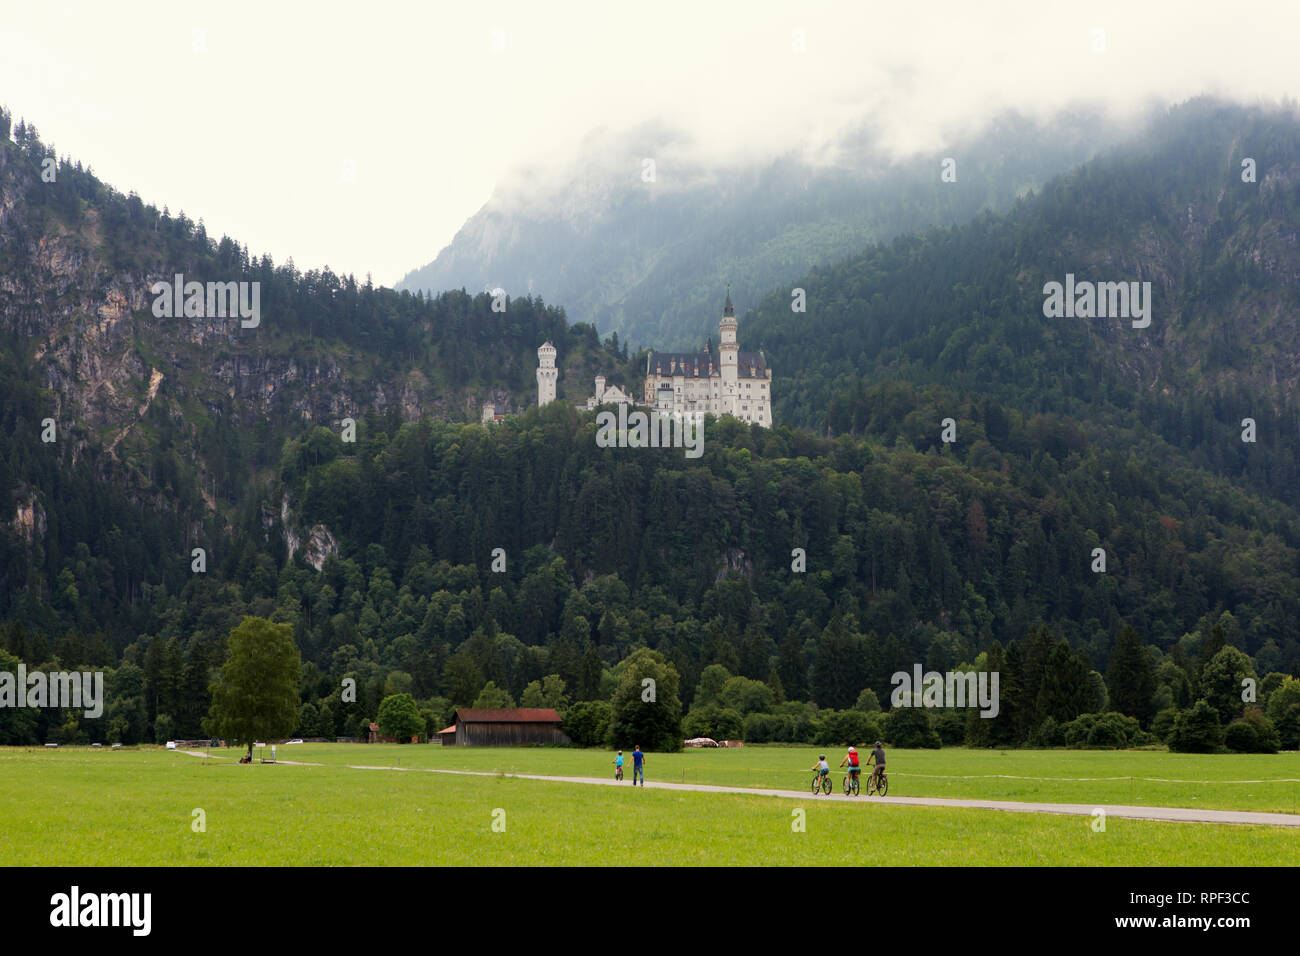 SCHWANGAU - Cyclists with the famous Neuschwanstein castle in the background. Stock Photo